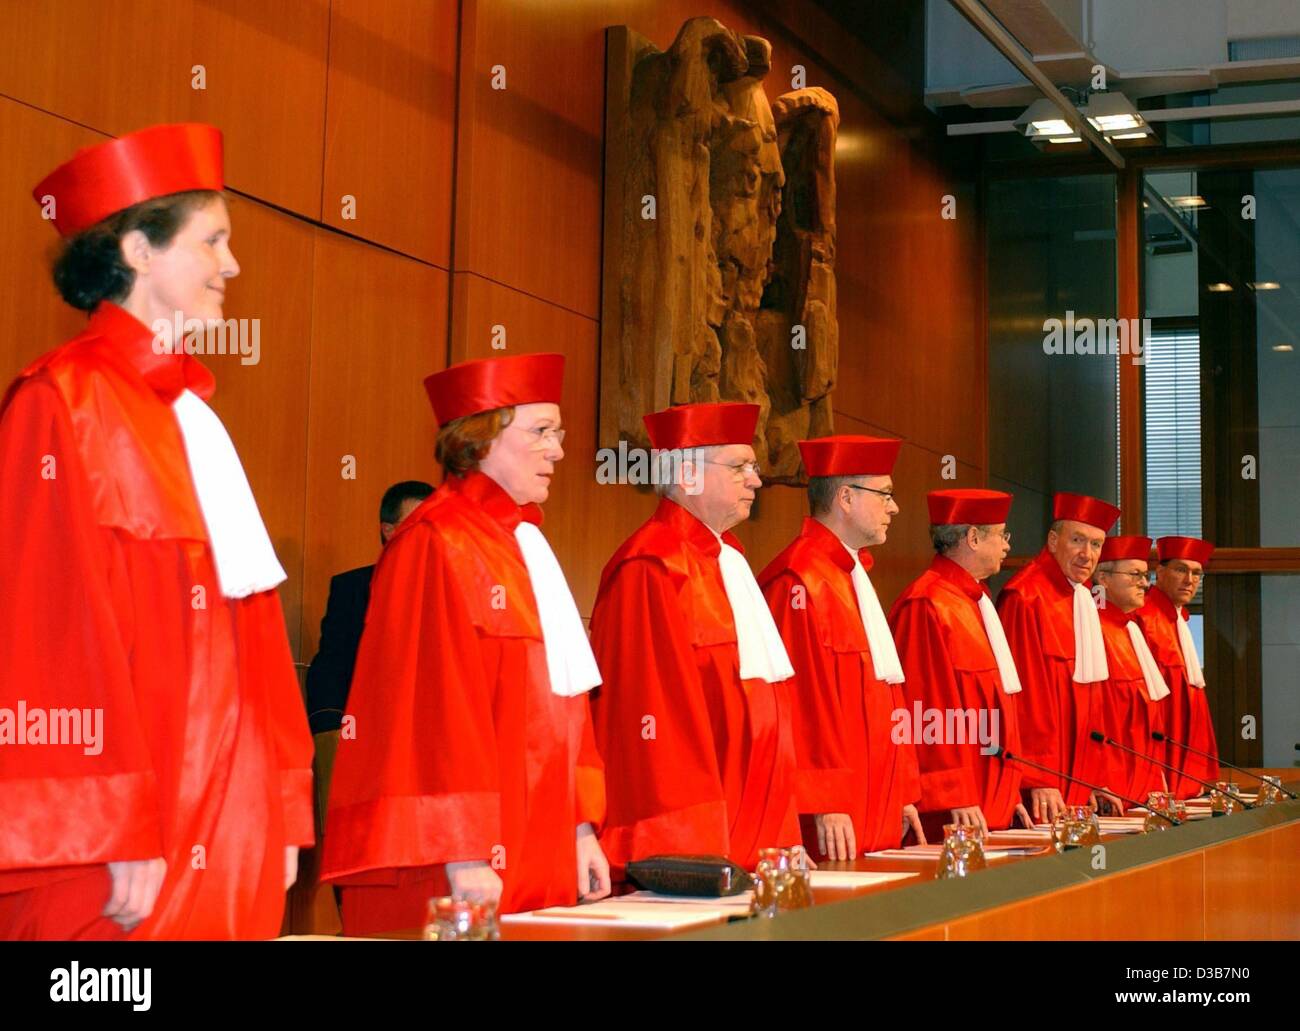 (dpa) - The second division of the Federal Constitutional Court, Gertrude Luebbe-Wolff, Lerke Osterloh, Hans-Joachim Jentsch, Udo Di Fabio, Vice President Winfried Hassemer, Bertold Sommer, Siegfried Bross and Rudolf Mellinghoff (L-R), are announcing their judgement on the immigration law by the red Stock Photo